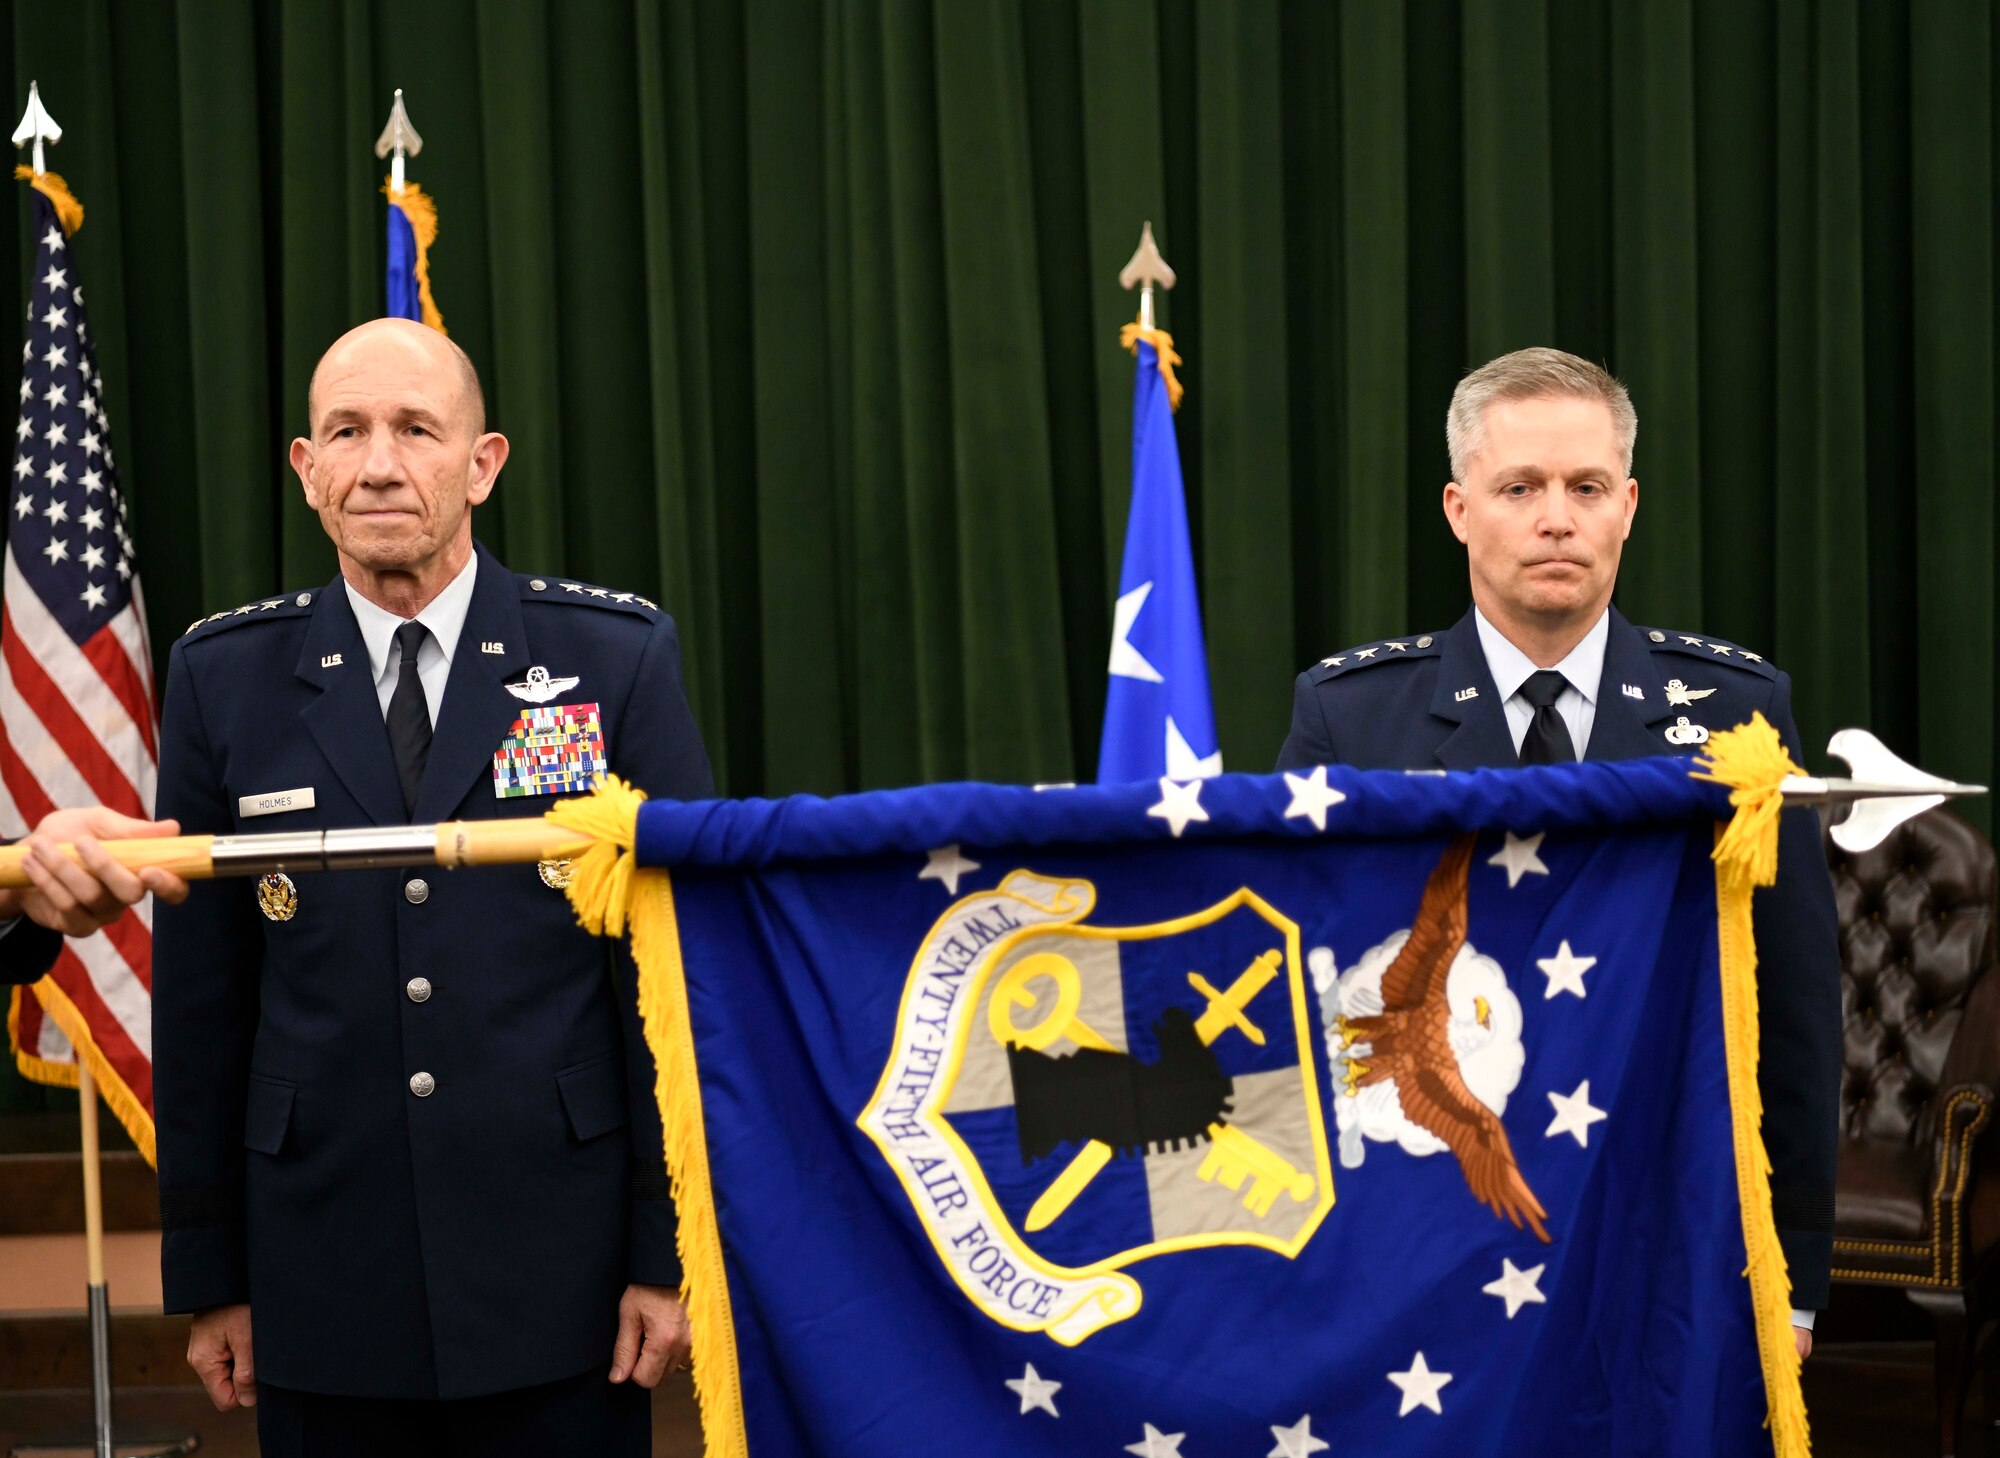 The Twenty-Fifth Air Force flag is furled to signify its inactivation, as Gen. Mike Holmes, commander of Air Combat Command, and Lt. Gen. Timothy Haugh, Twenty-Fifth Air Force commander, look on during the Sixteenth Air Force Assumption of Command at Joint Base San Antonio-Lackland, Texas, Oct. 11, 2019. Twenty-Fourth Air Force was also inactivated during the ceremony to integrate into the new information warfare Numbered Air Force. Sixteenth Air Force is responsible for providing IW capabilities to combatant commanders with the speed to match today’s technological environment. (U.S. Air Force photo by Tech. Sgt. R.J. Biermann)